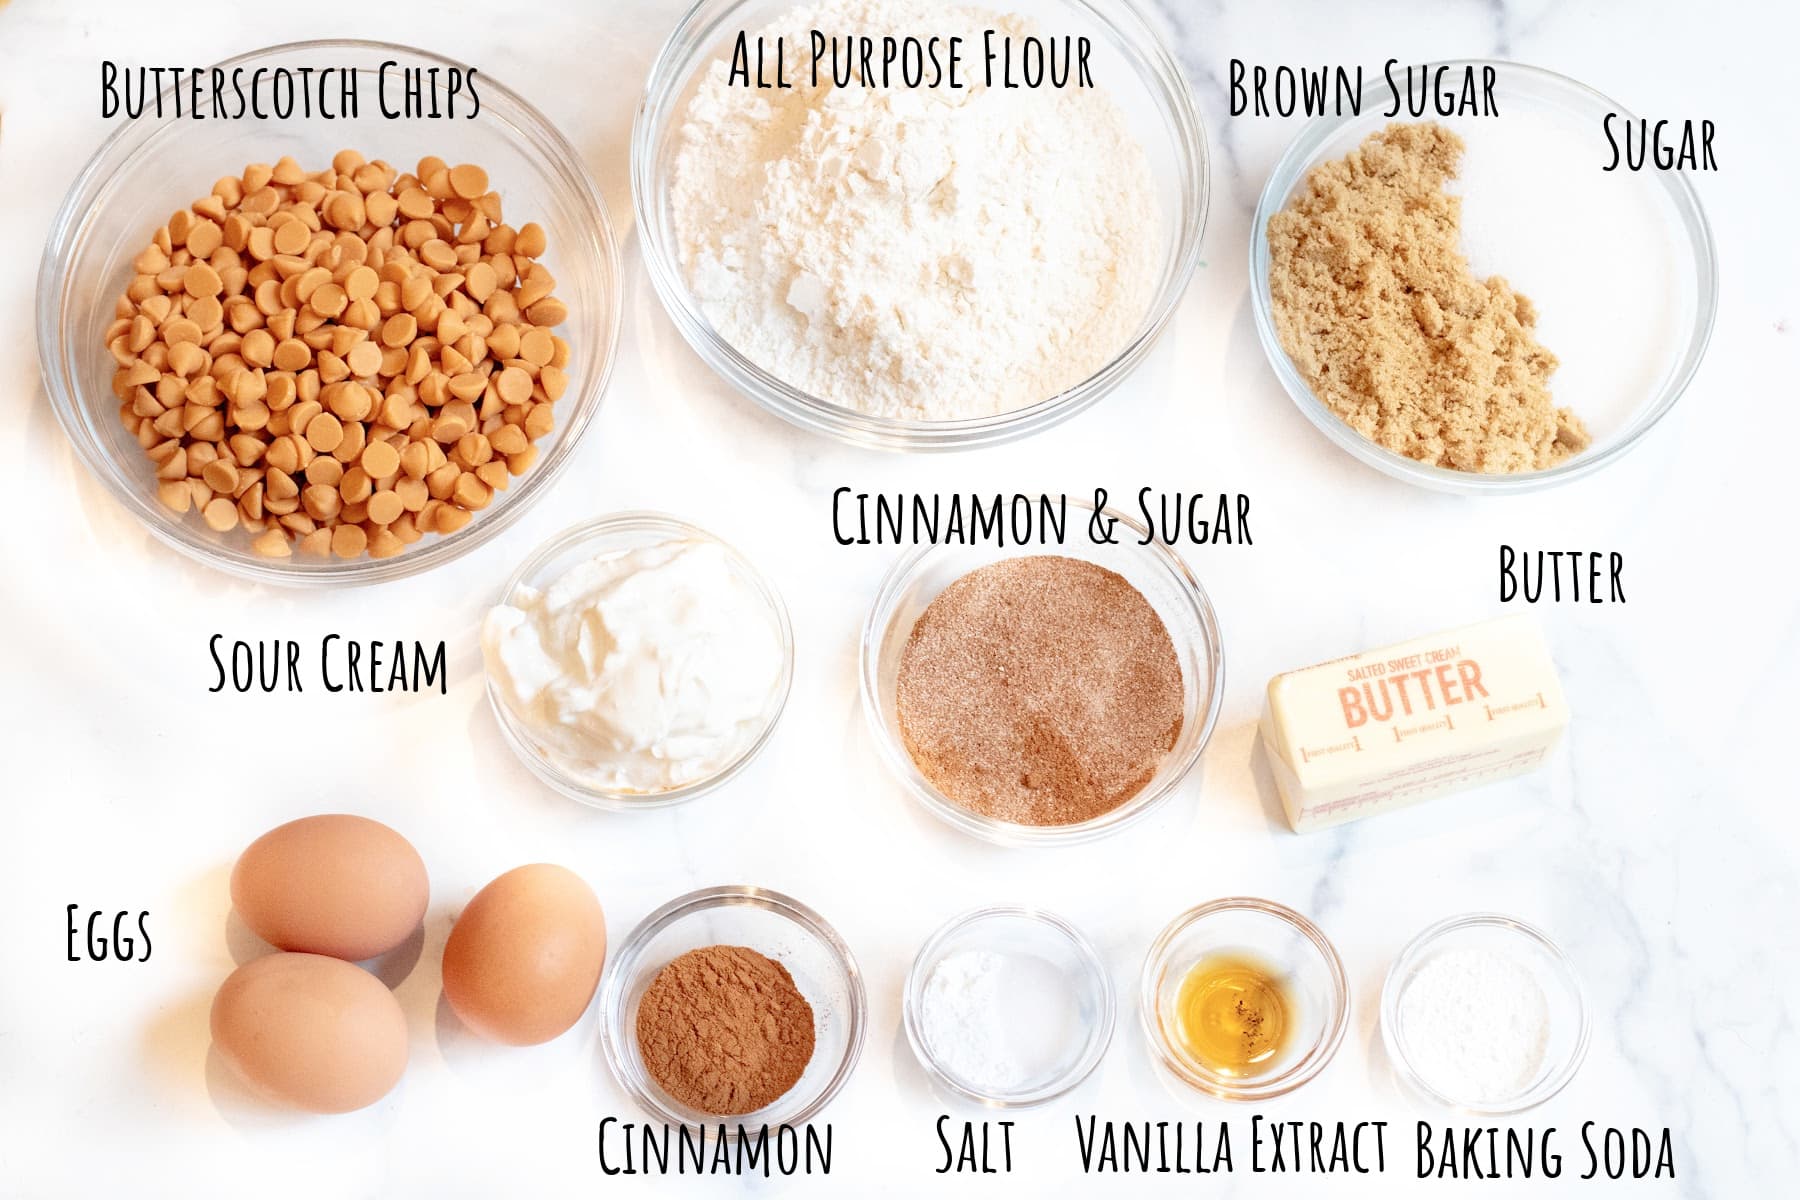 butterscotch chips, flour, sugars, butter, eggs, cinnamon, sour cream, vanilla, cinnamon and sugar, and salt, cream of tarter, and baking soda in bowls.